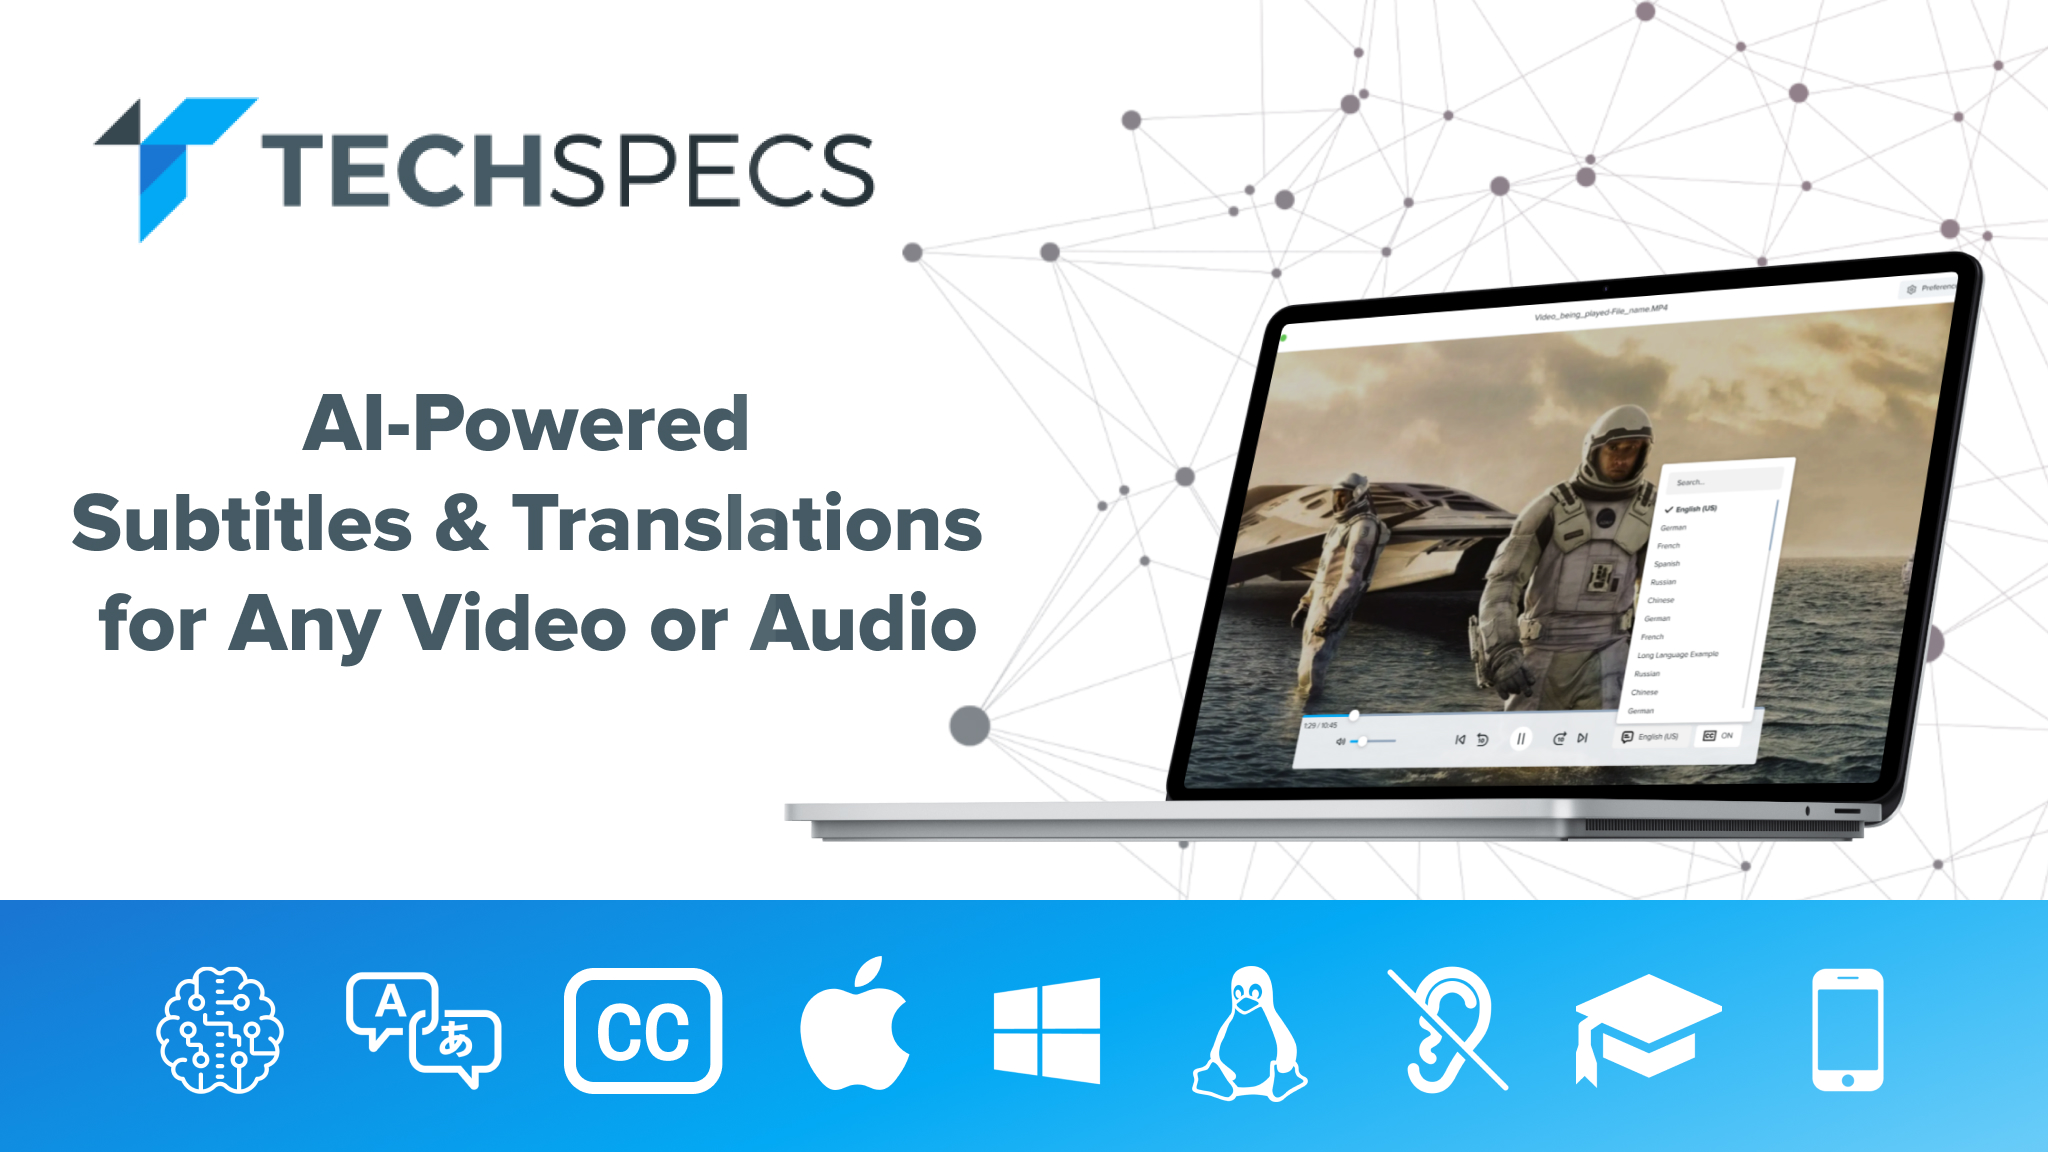 TechSpecs Ray Announces Upcoming Launch of Revolutionary AI-Powered Subtitling and Translation App on Kickstarter